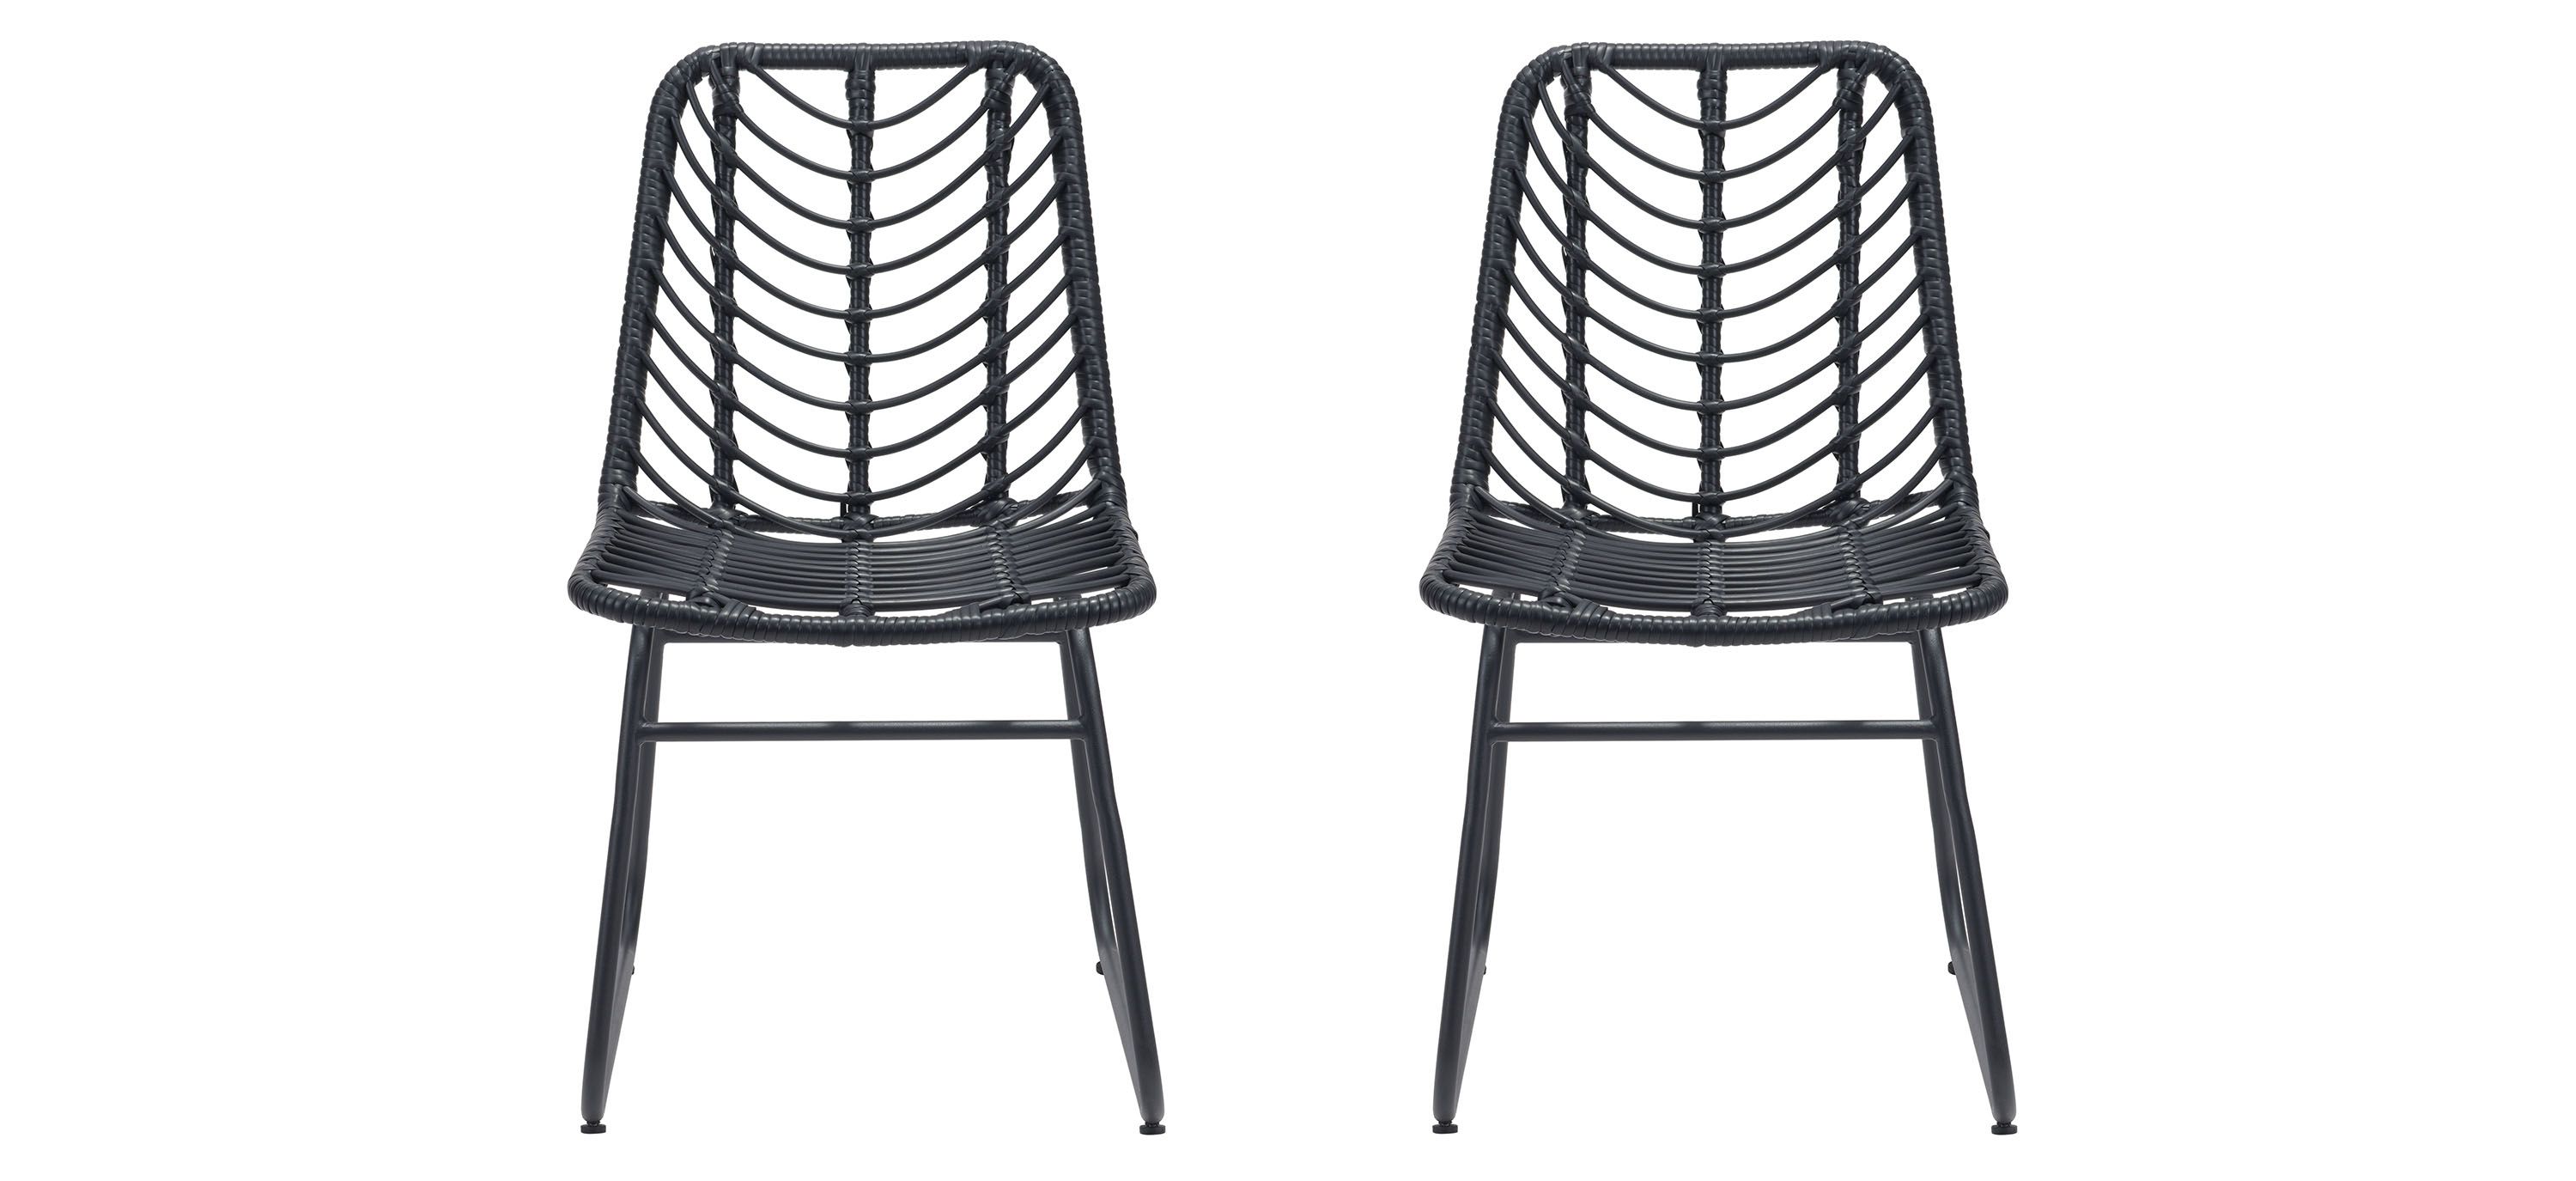 Lapha Outdoor Dining Chair - Set of 2